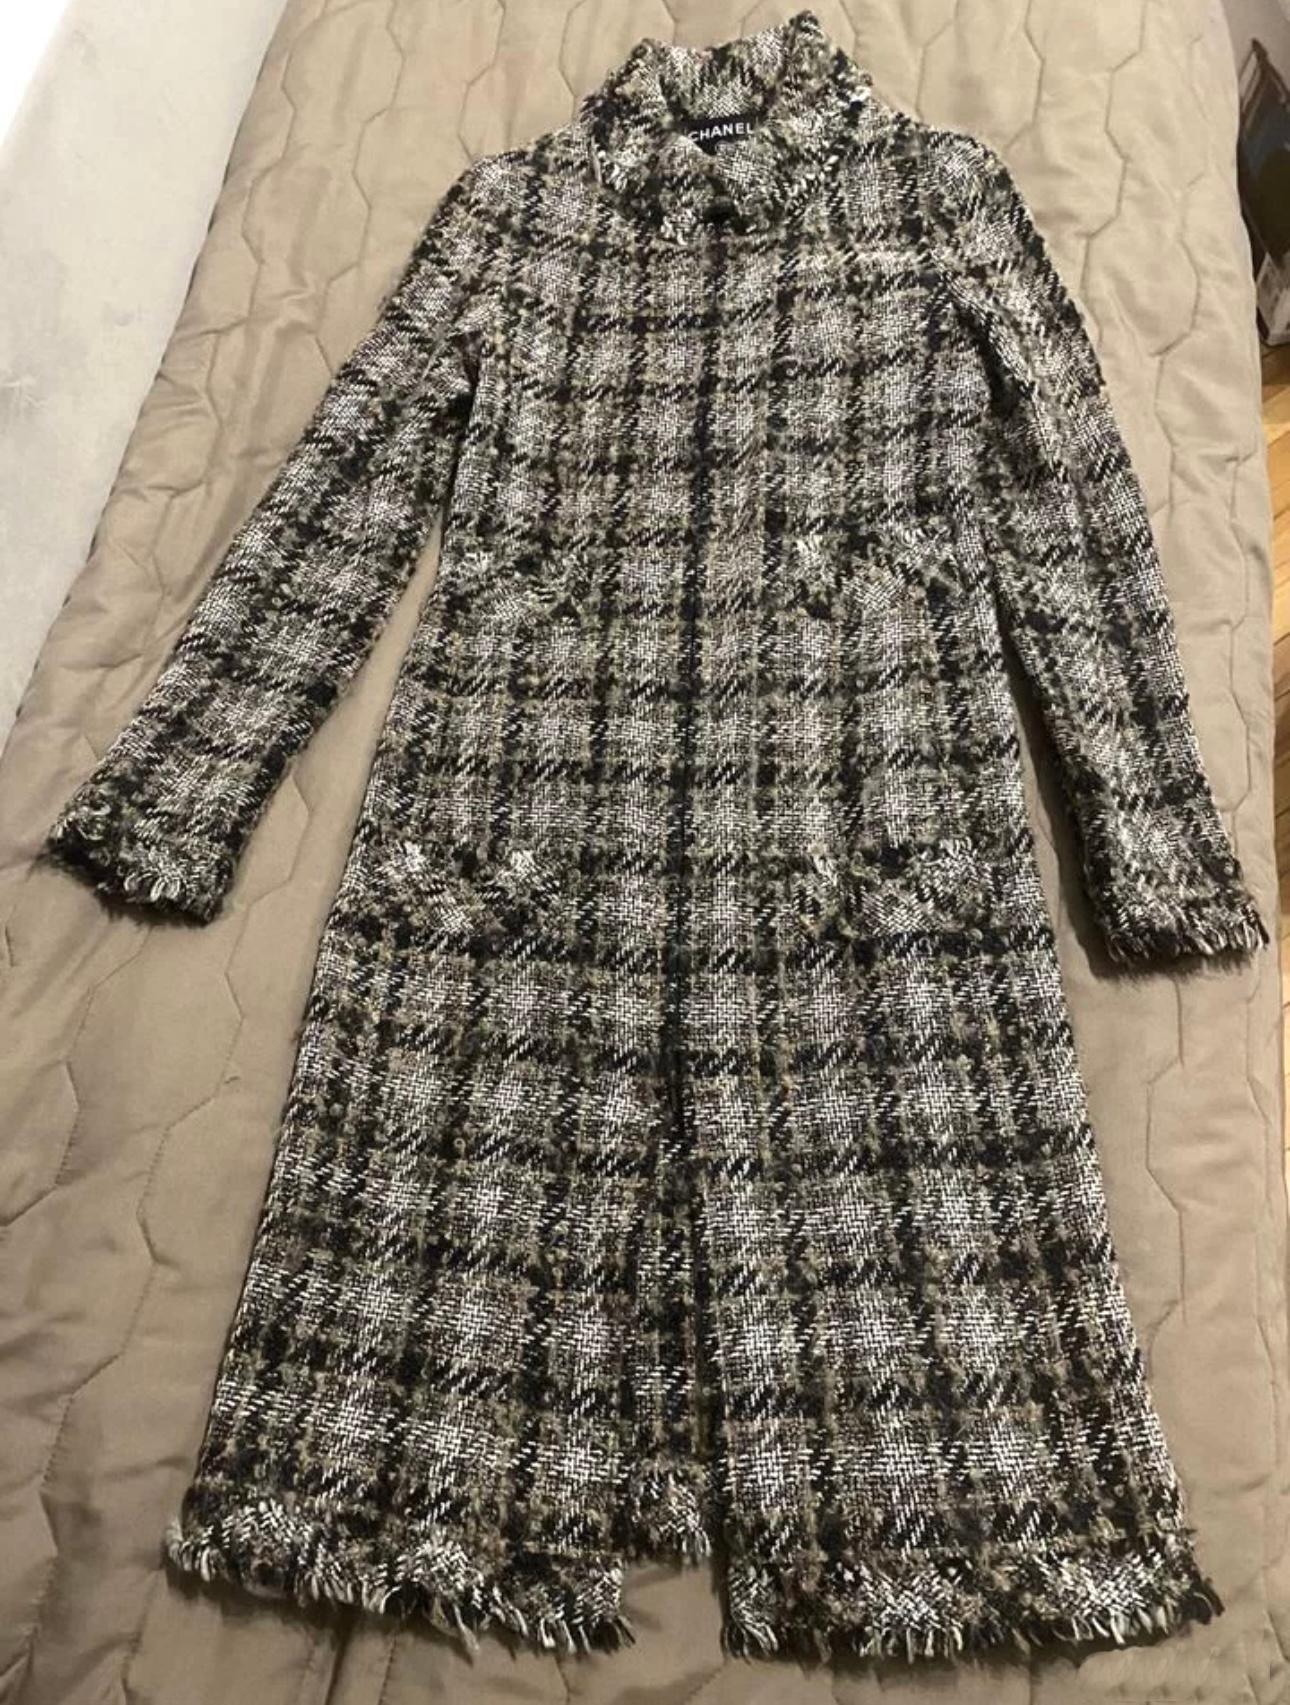 Rare Chanel brown maxi tweed coat with CC logo buttons from 2005 Fall Collection by Karl Lagerfeld.
Size mark 38 FR. Pristine condition.